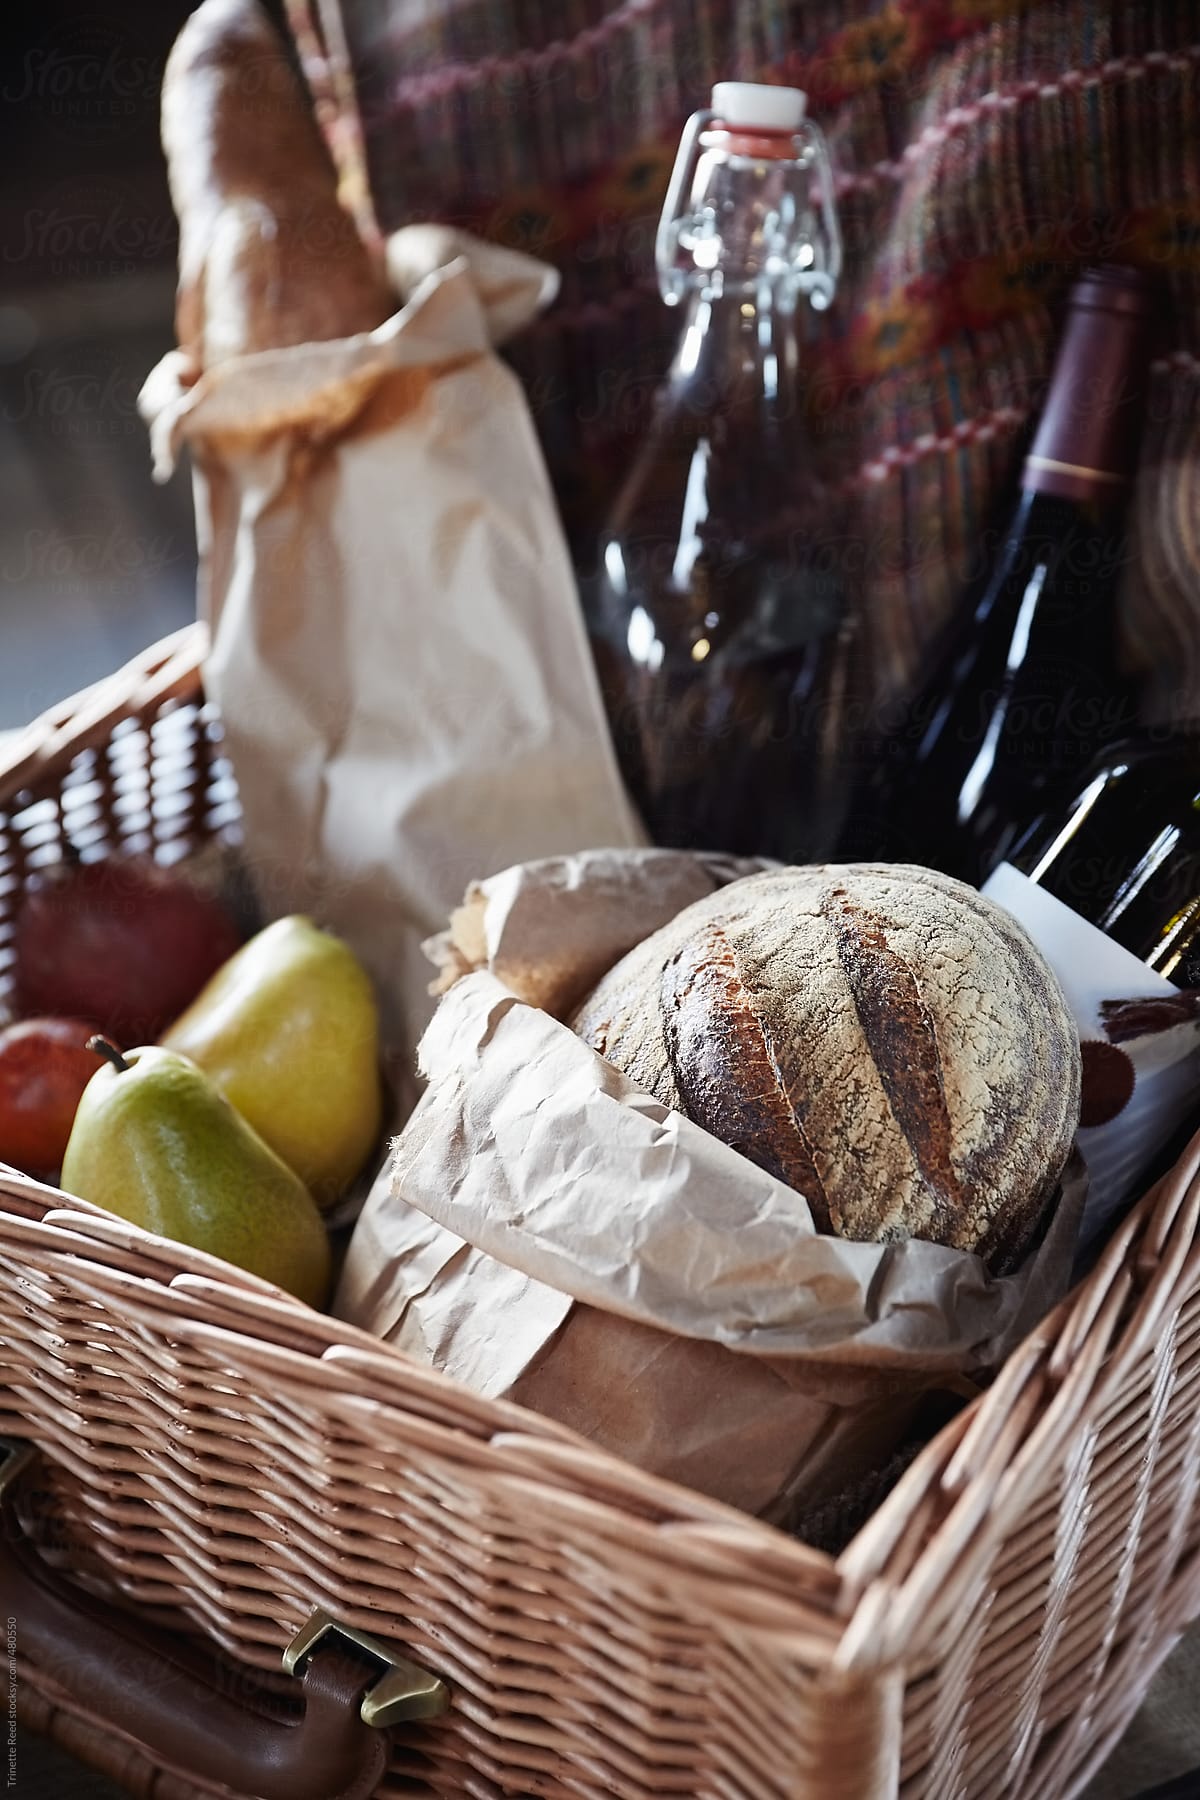 Bread, wine, and fruit in rustic woven picnic basket